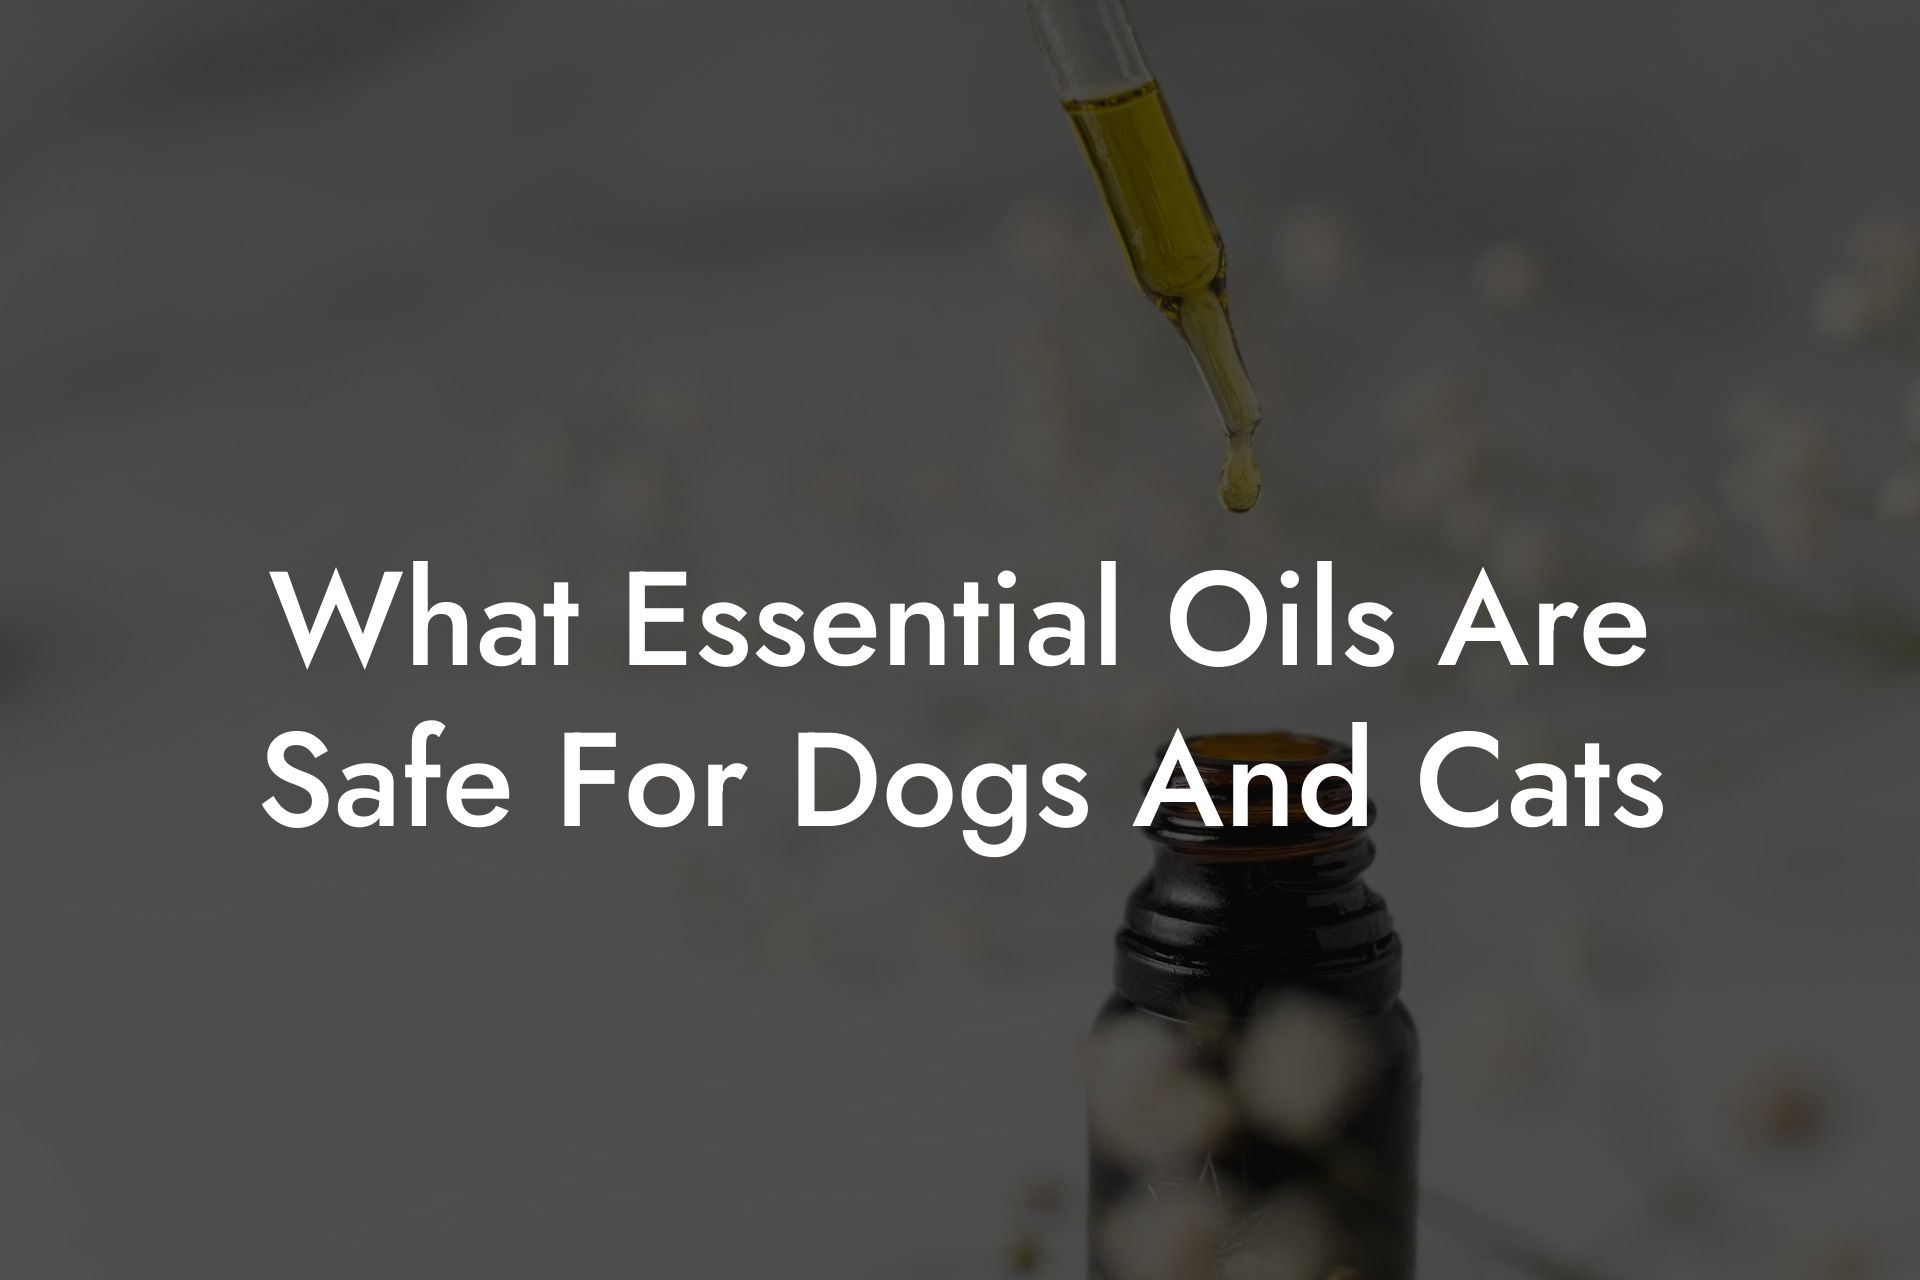 What Essential Oils Are Safe For Dogs And Cats